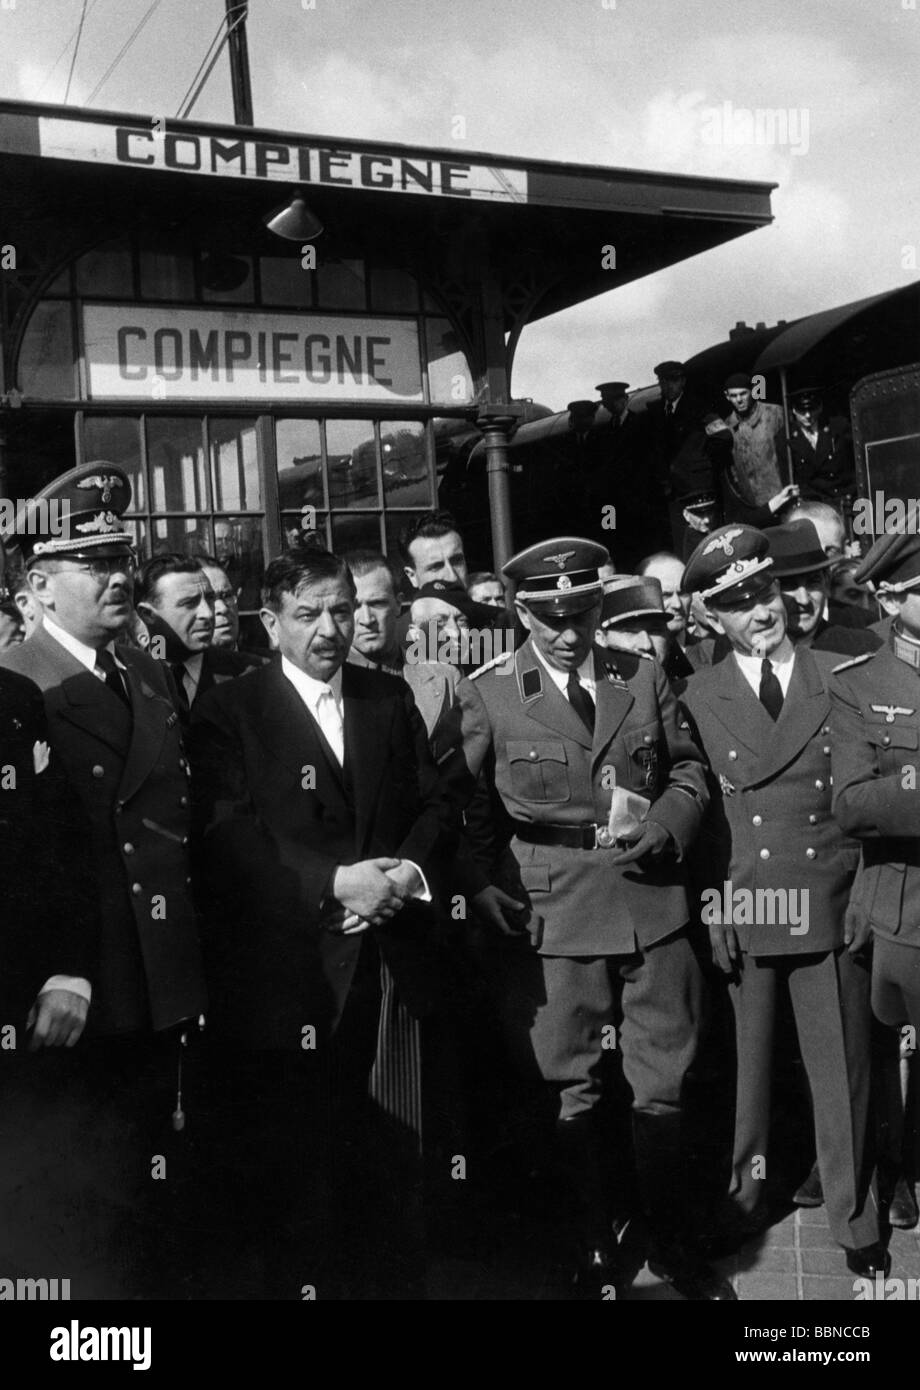 events, Second World War / WWII, France, politics, release of French prisoners of war, in exchange for voluntary French workers, arrival in Compiegne, 11.8.1942, Prime Minister Pierre Laval, German and French officers and officials as reception committee, Stock Photo